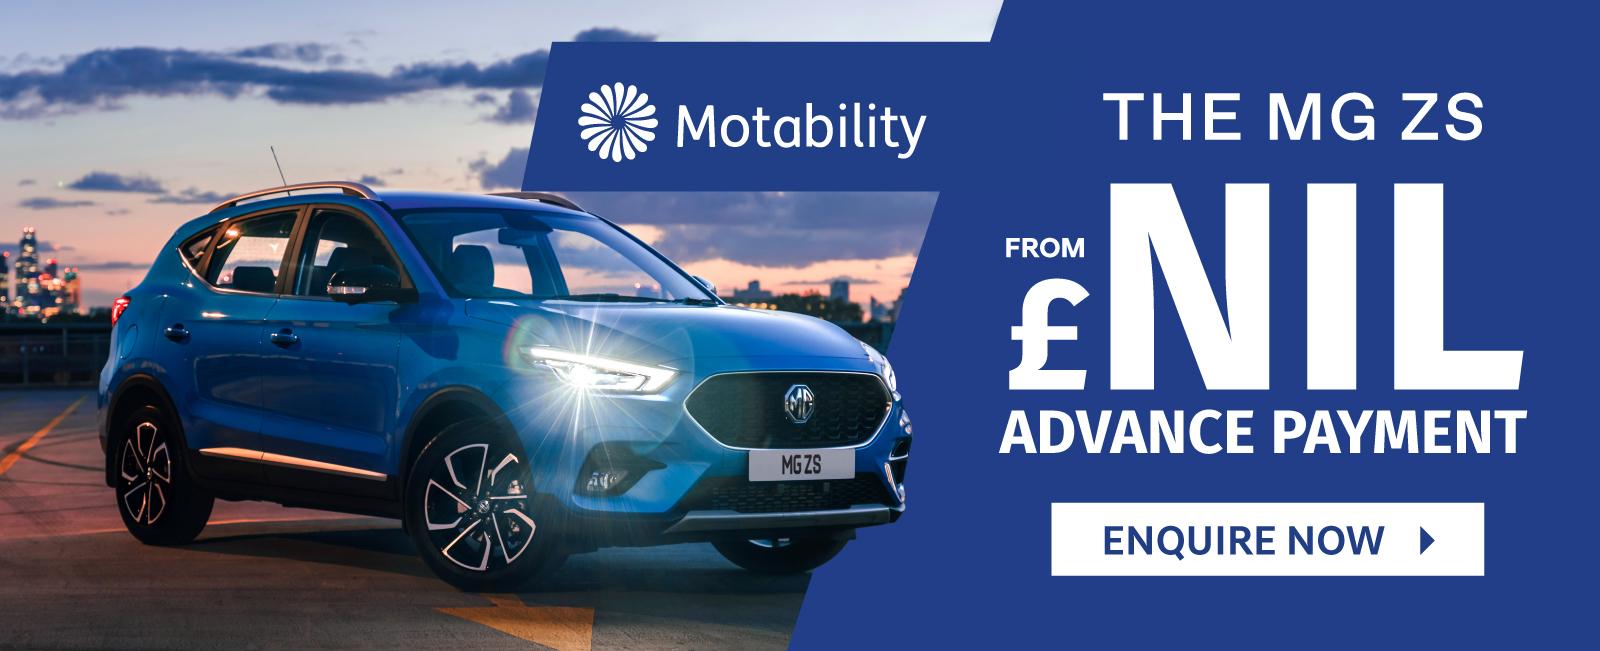 The MG ZS on Motability Scheme from £NIL Advance Payment